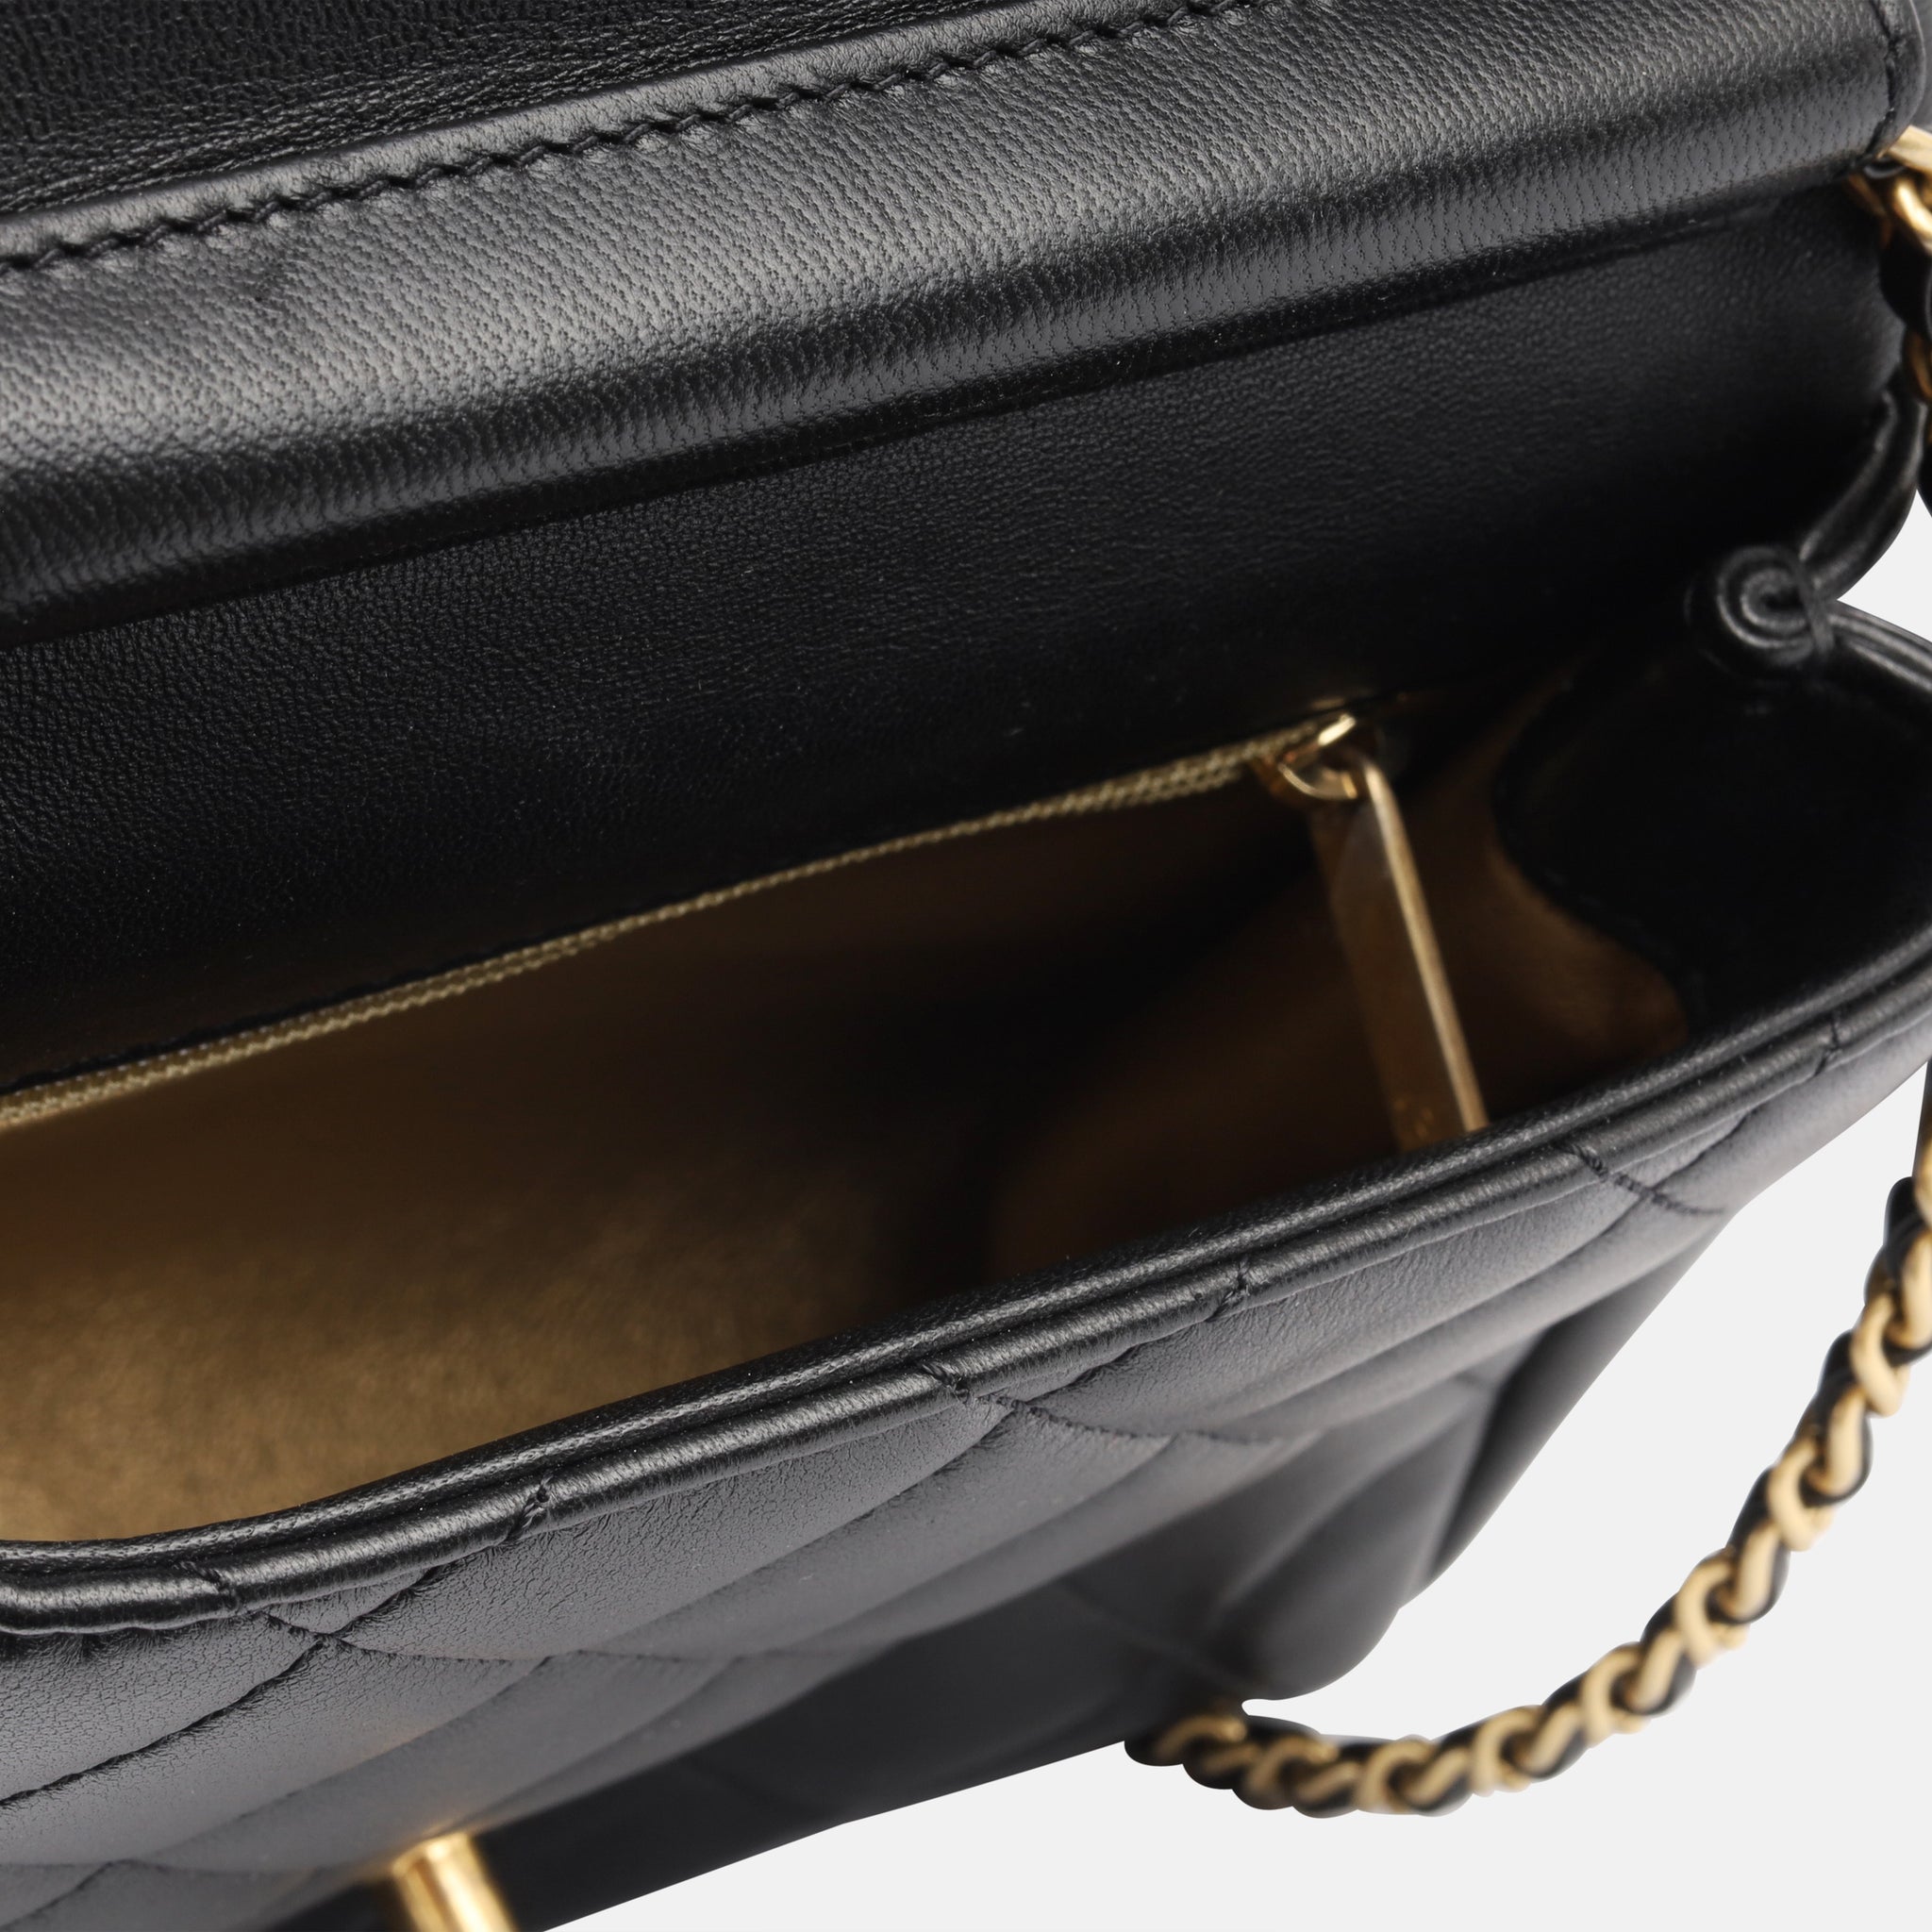 Chanel Side Pack Bags – Lux Second Chance